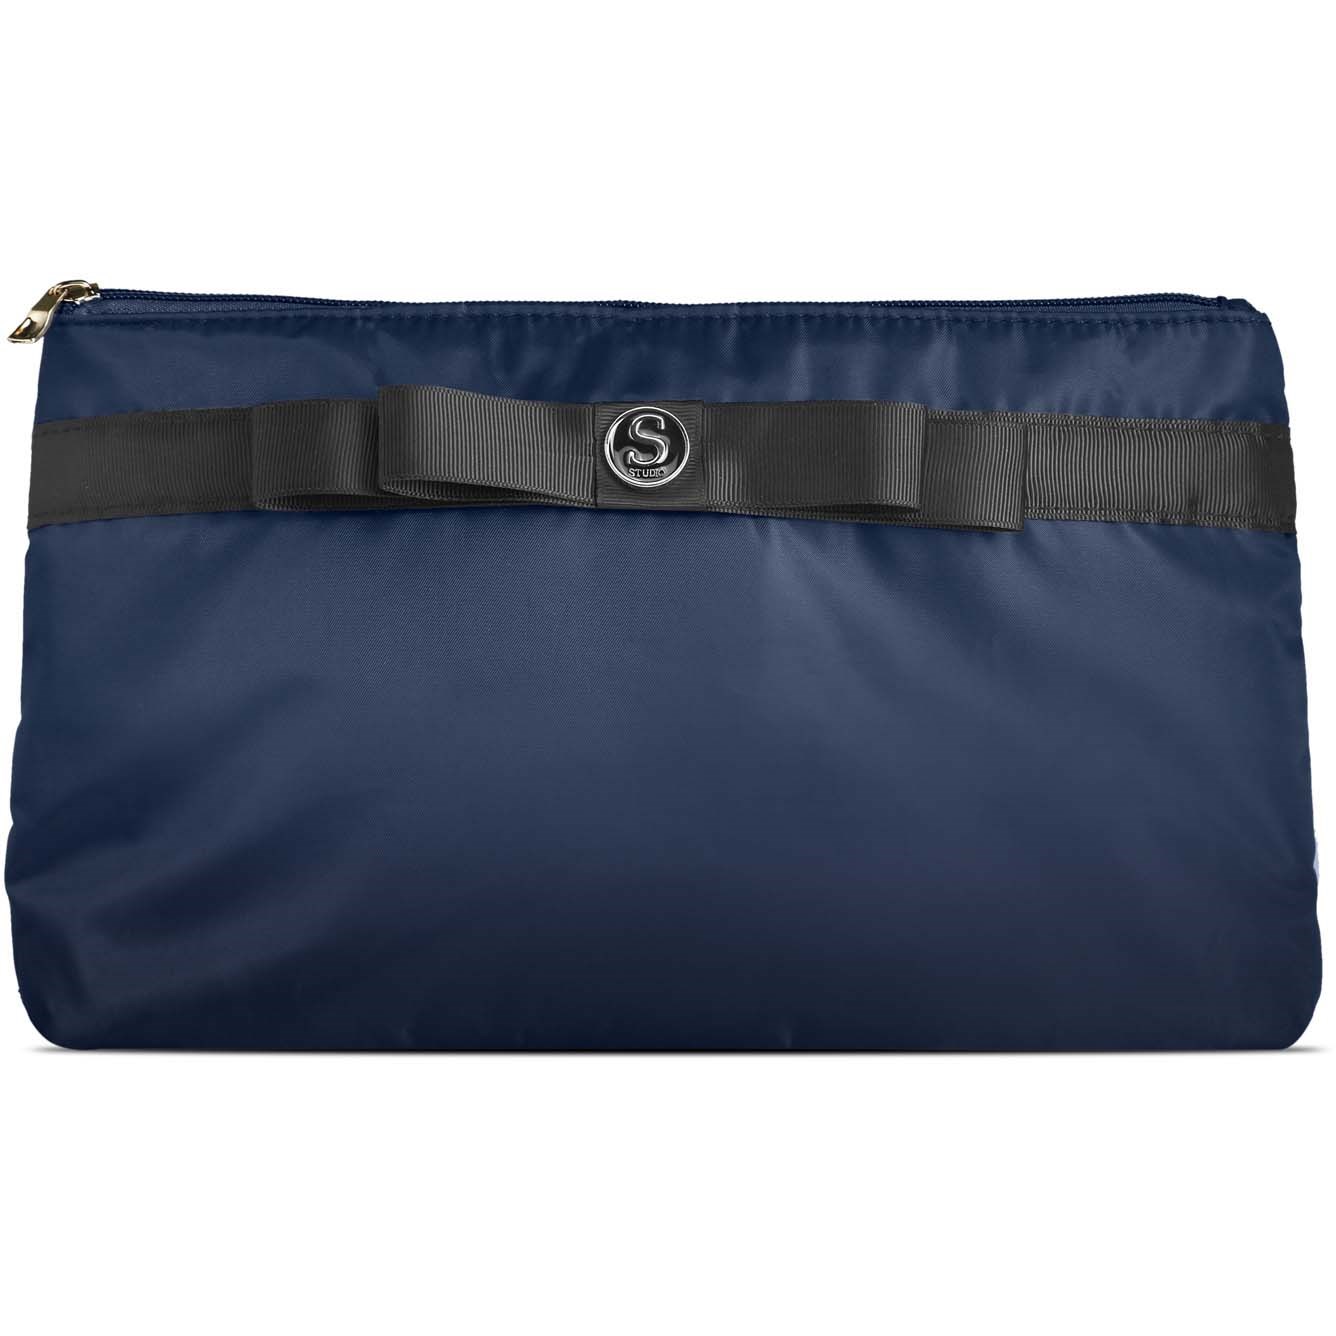 Studio Cosmeticbag With Bow Blue